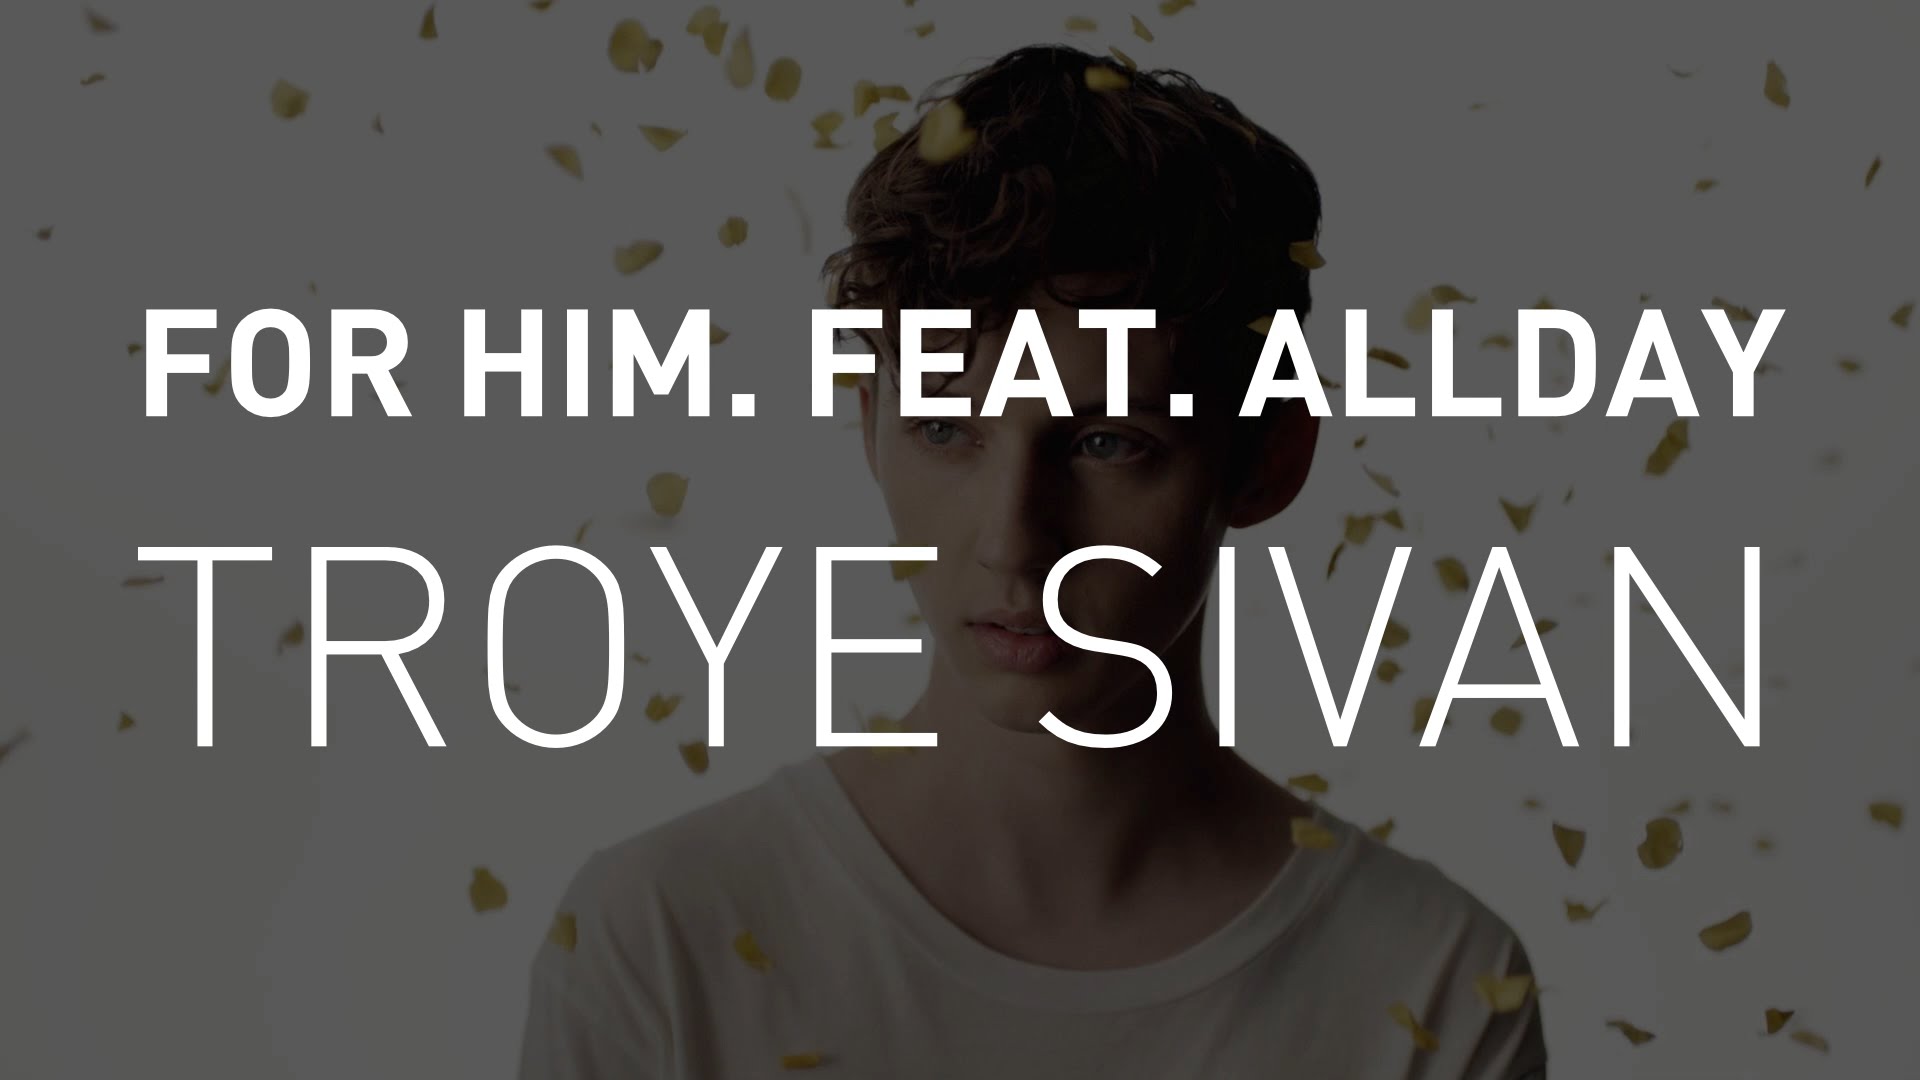 Troye Sivan - for him. feat. Allday